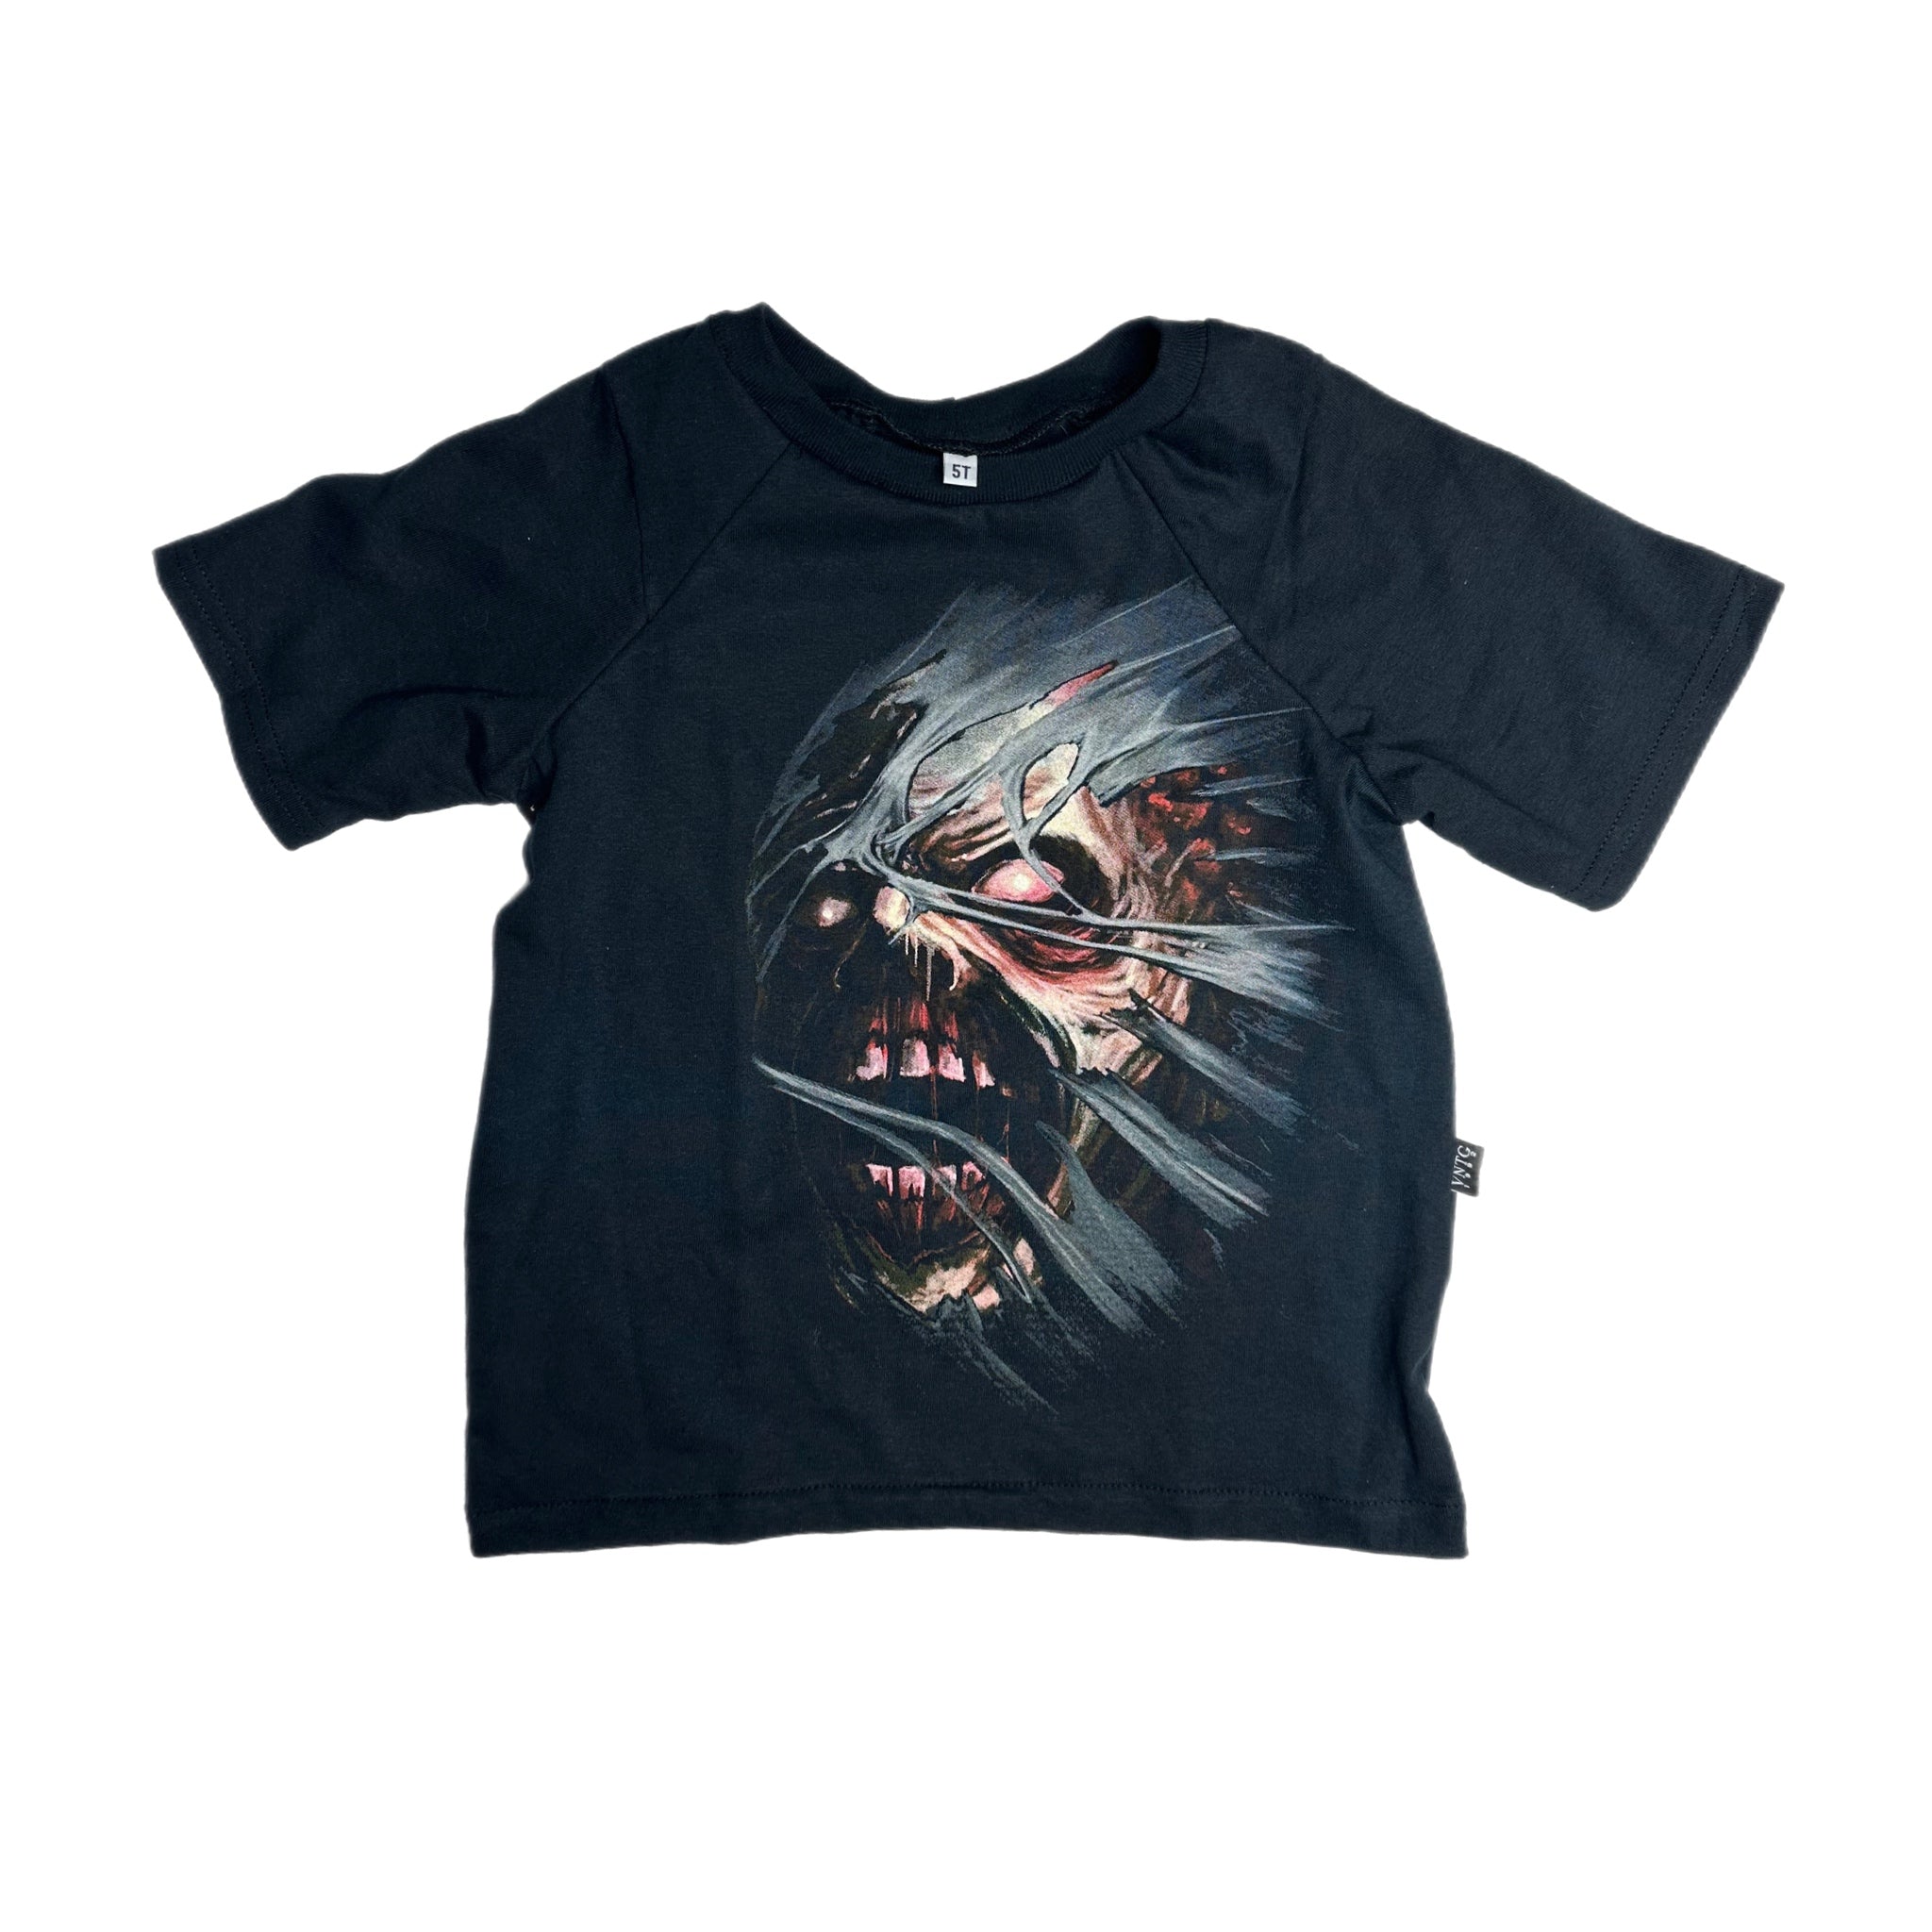 5T Screaming Zombie Resized Tee